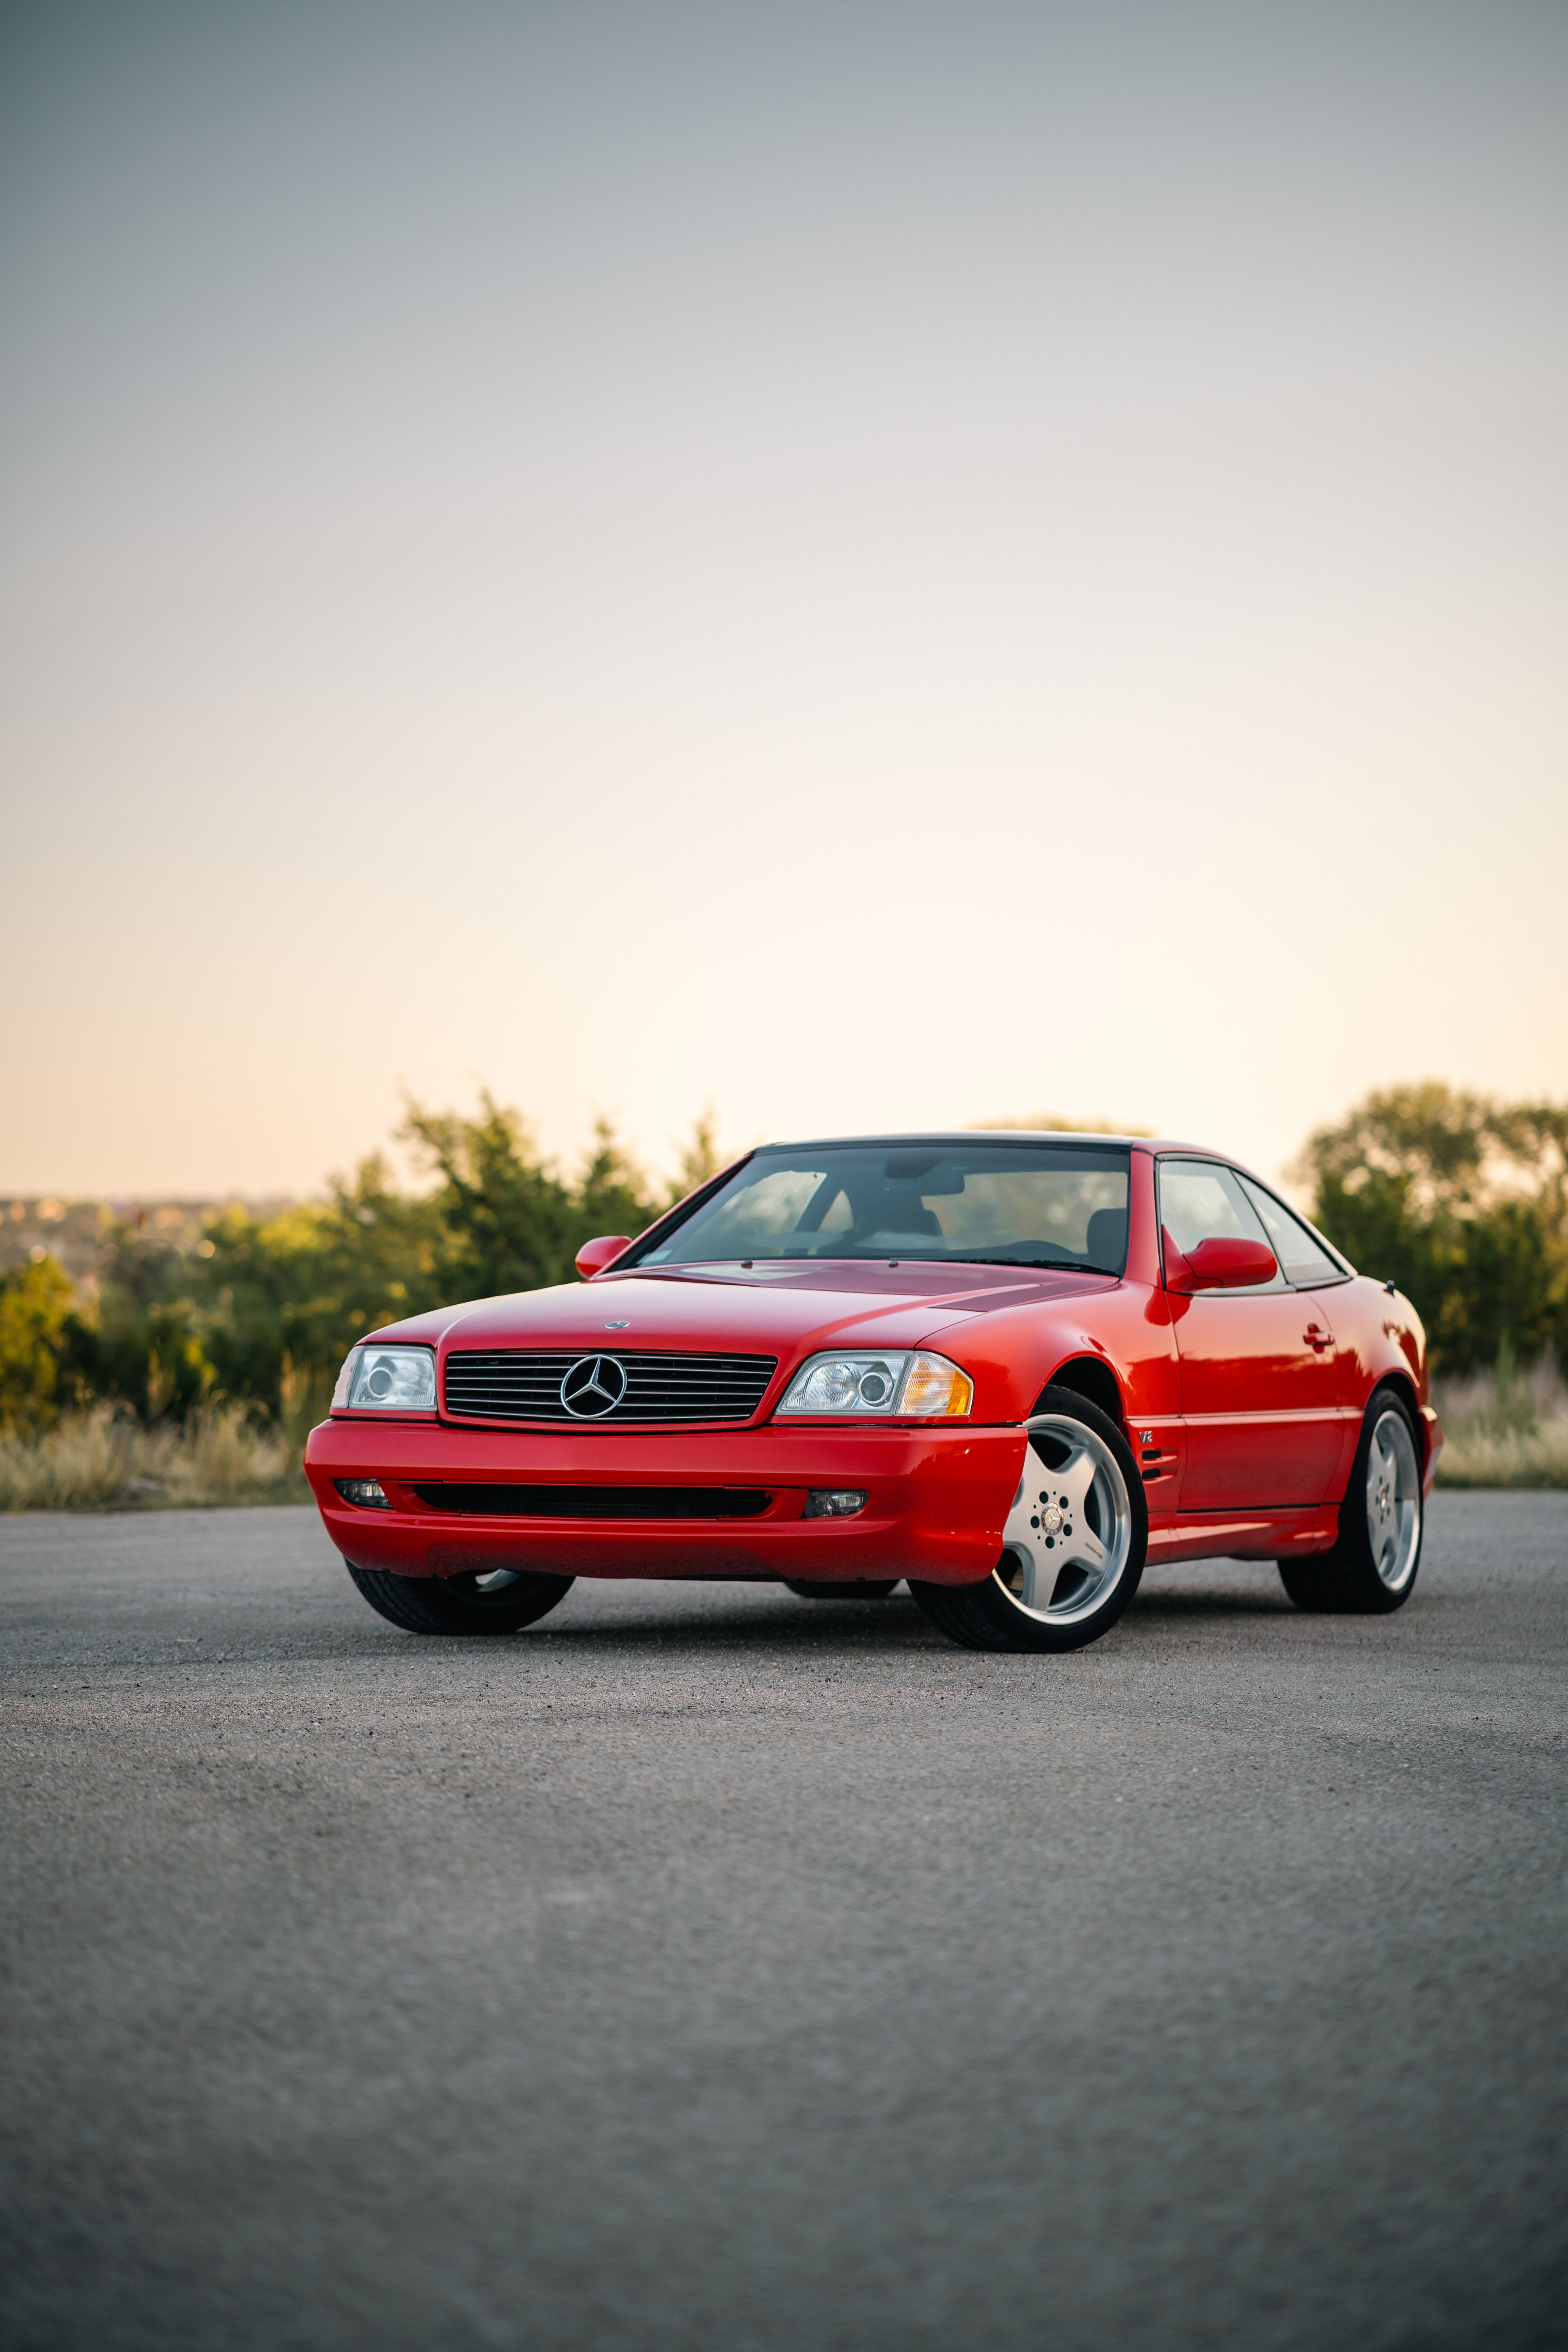 Mercedes-Benz SL600 in Dripping Springs, TX